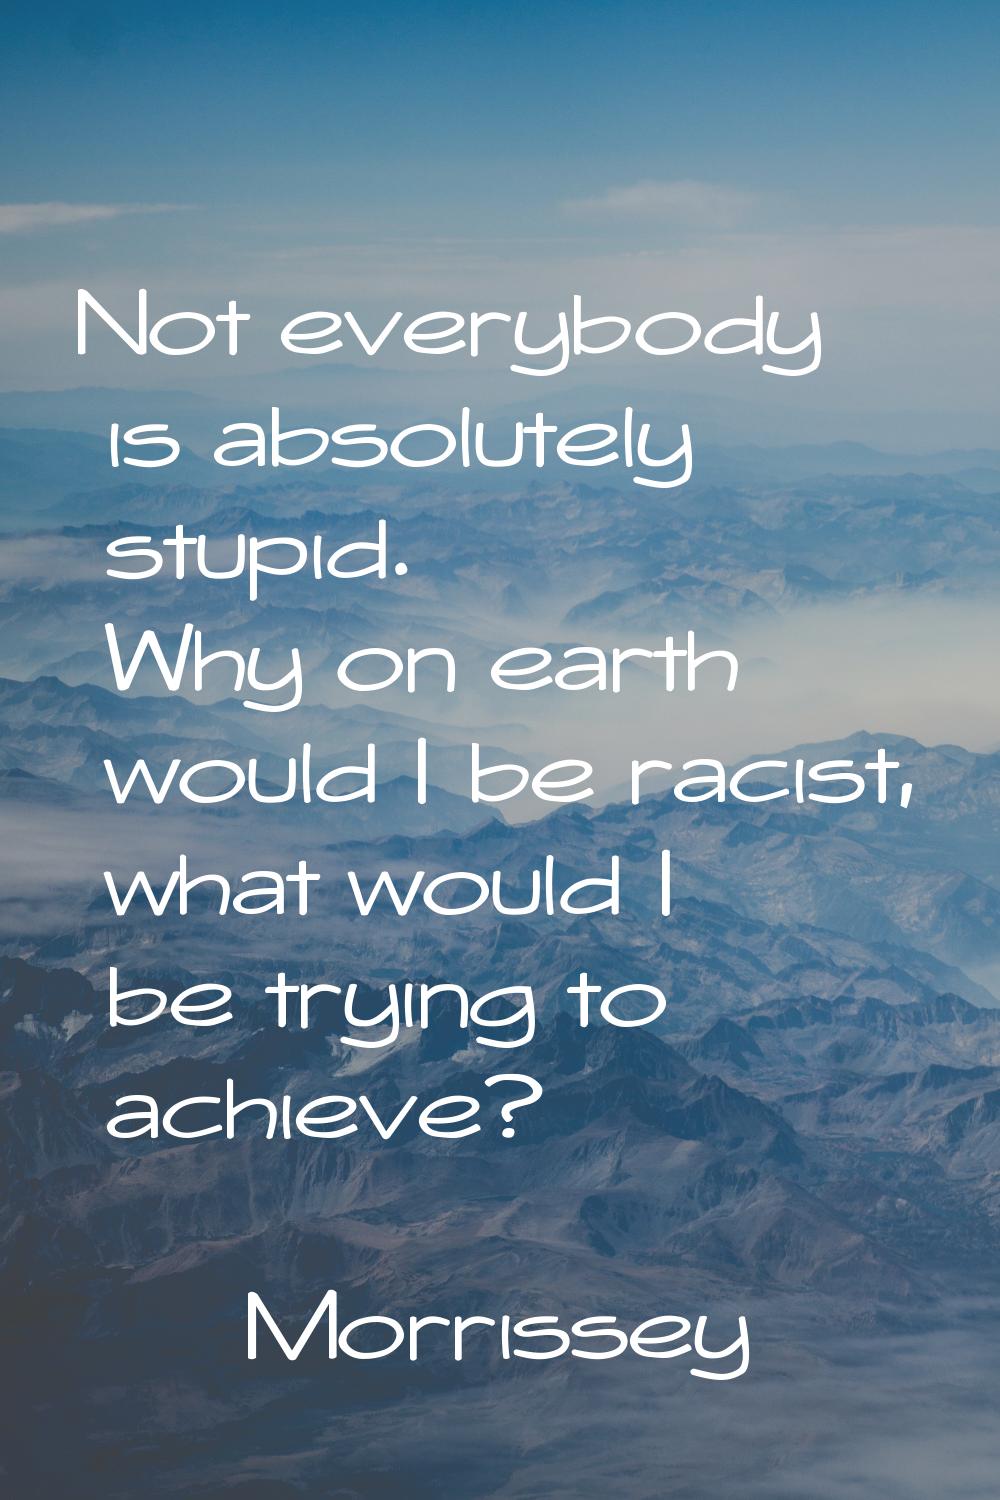 Not everybody is absolutely stupid. Why on earth would I be racist, what would I be trying to achie